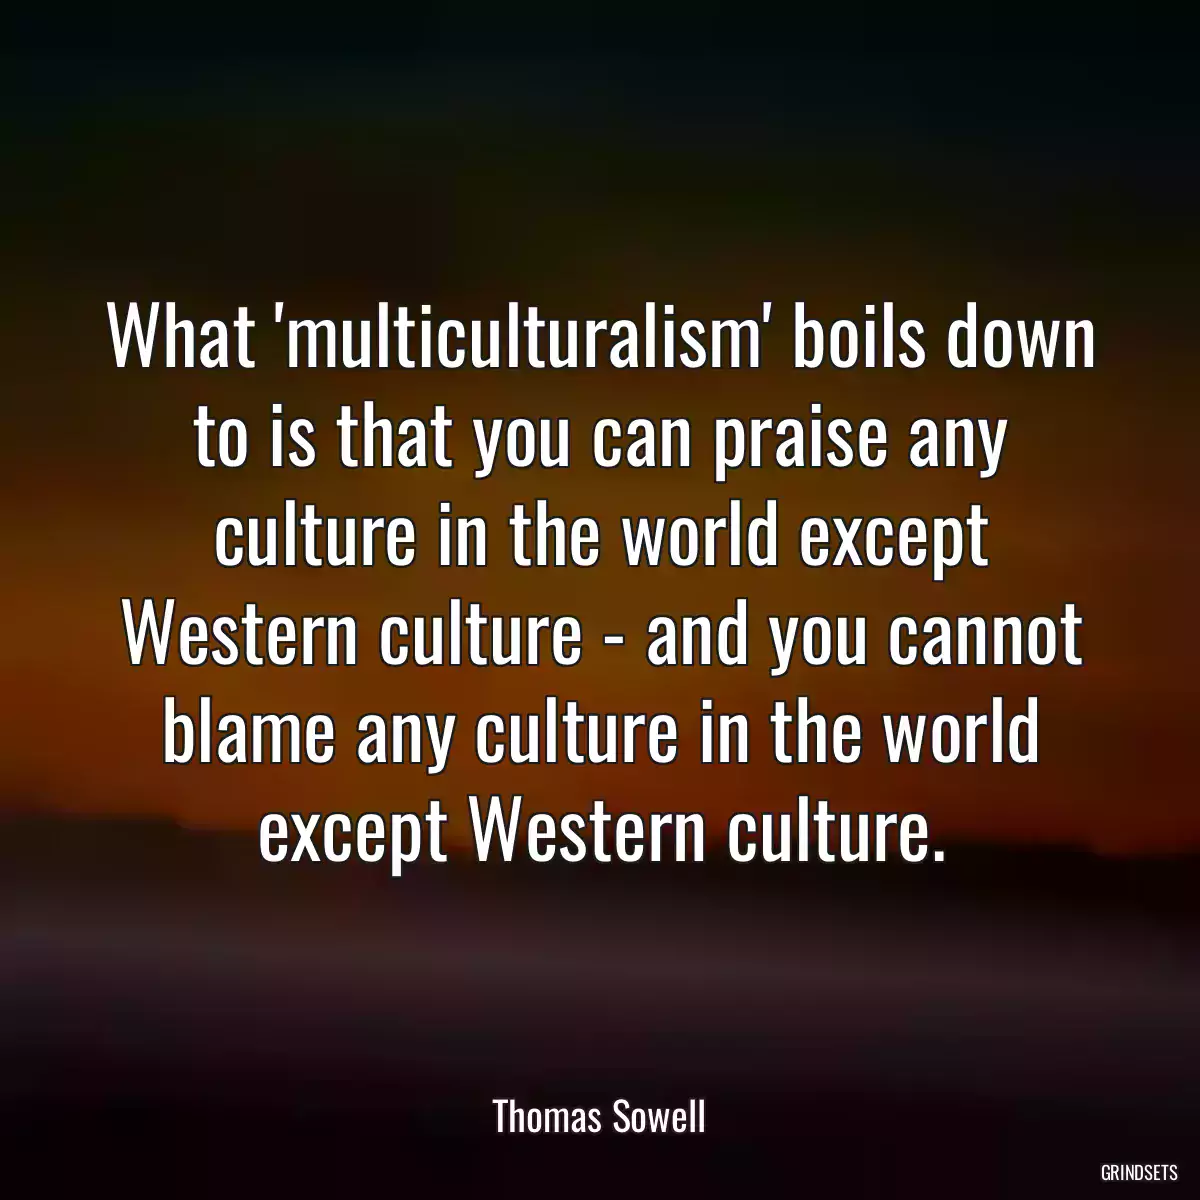 What \'multiculturalism\' boils down to is that you can praise any culture in the world except Western culture - and you cannot blame any culture in the world except Western culture.